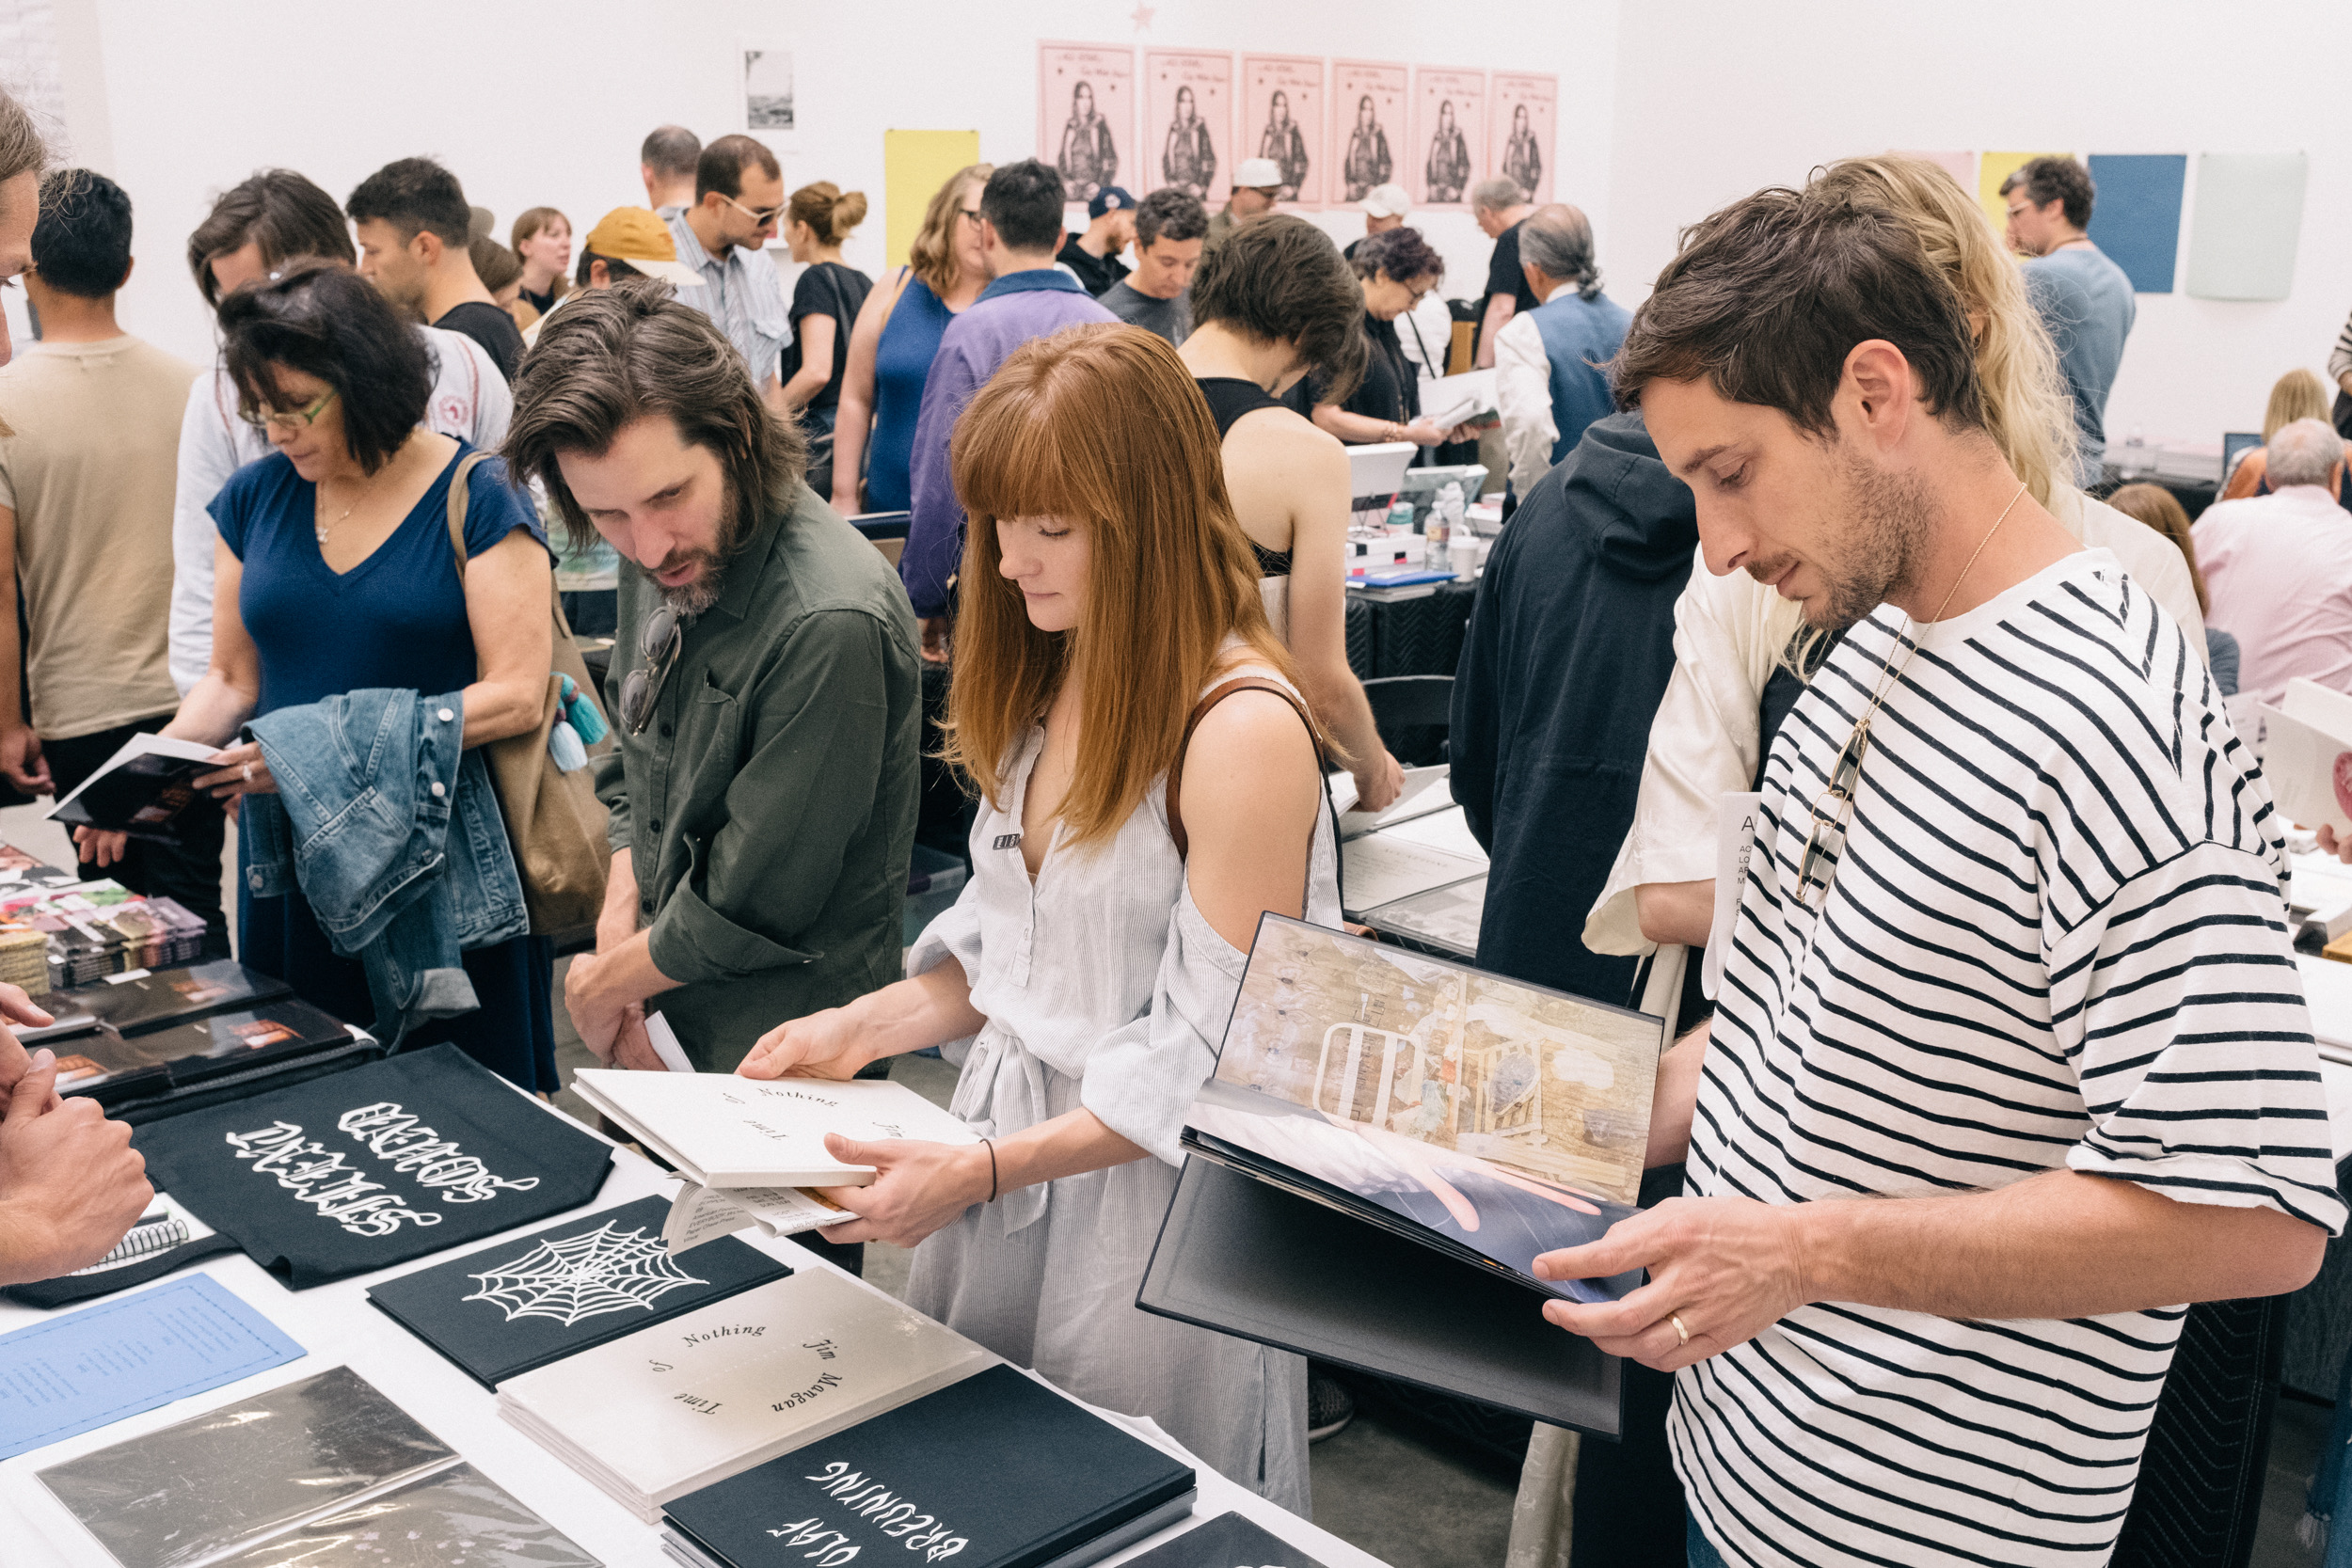 Los Angeles The City of Dreams and Sprawling Art Book Fairs GARAGE